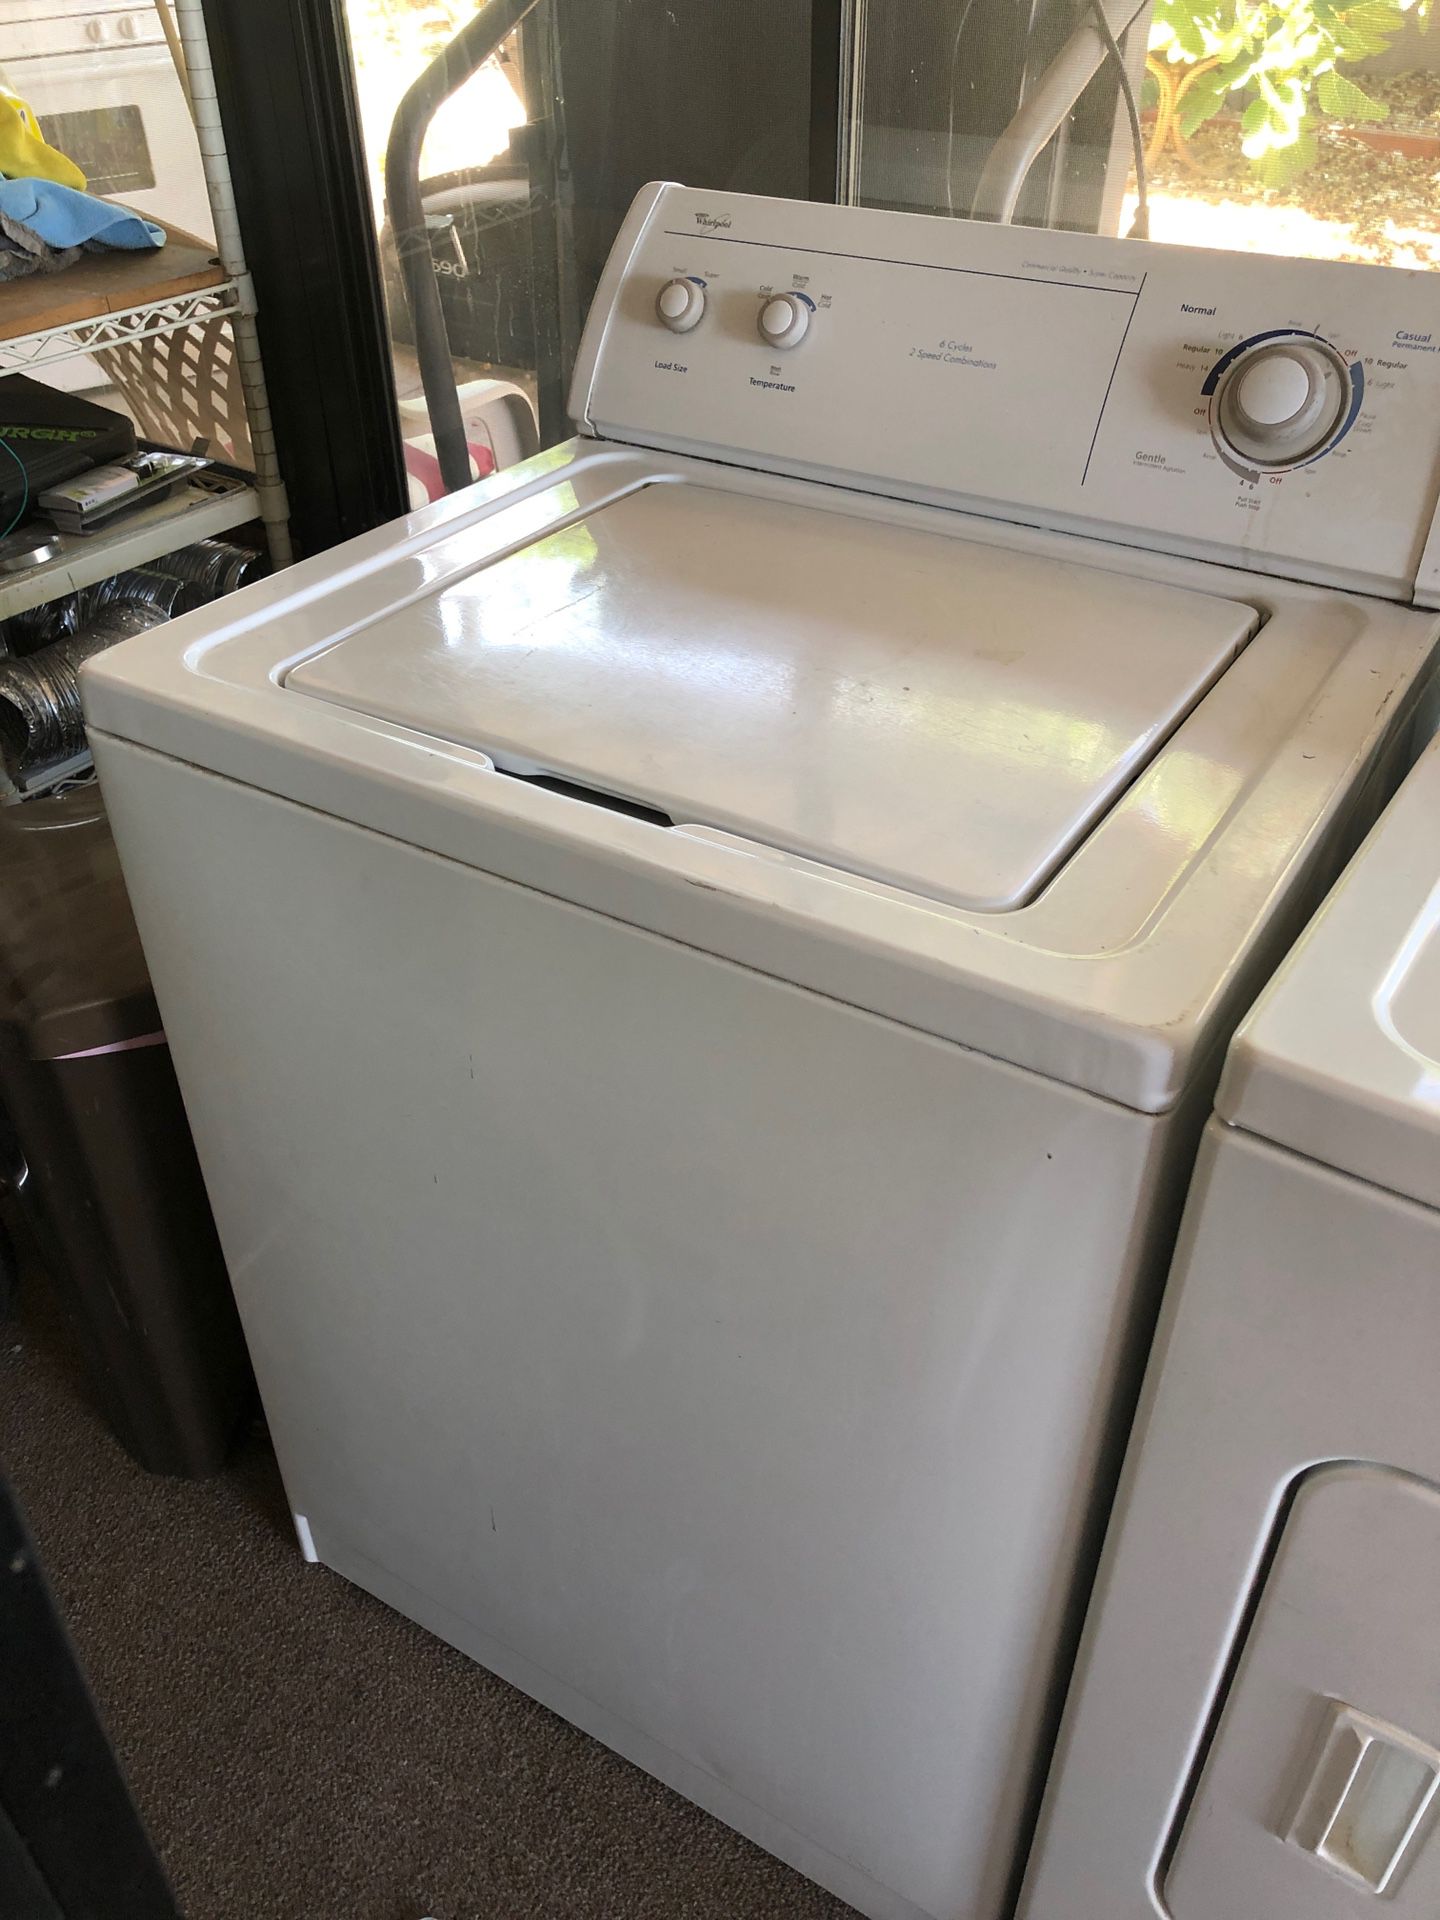 Whirlpool Washer and Gas Dryer